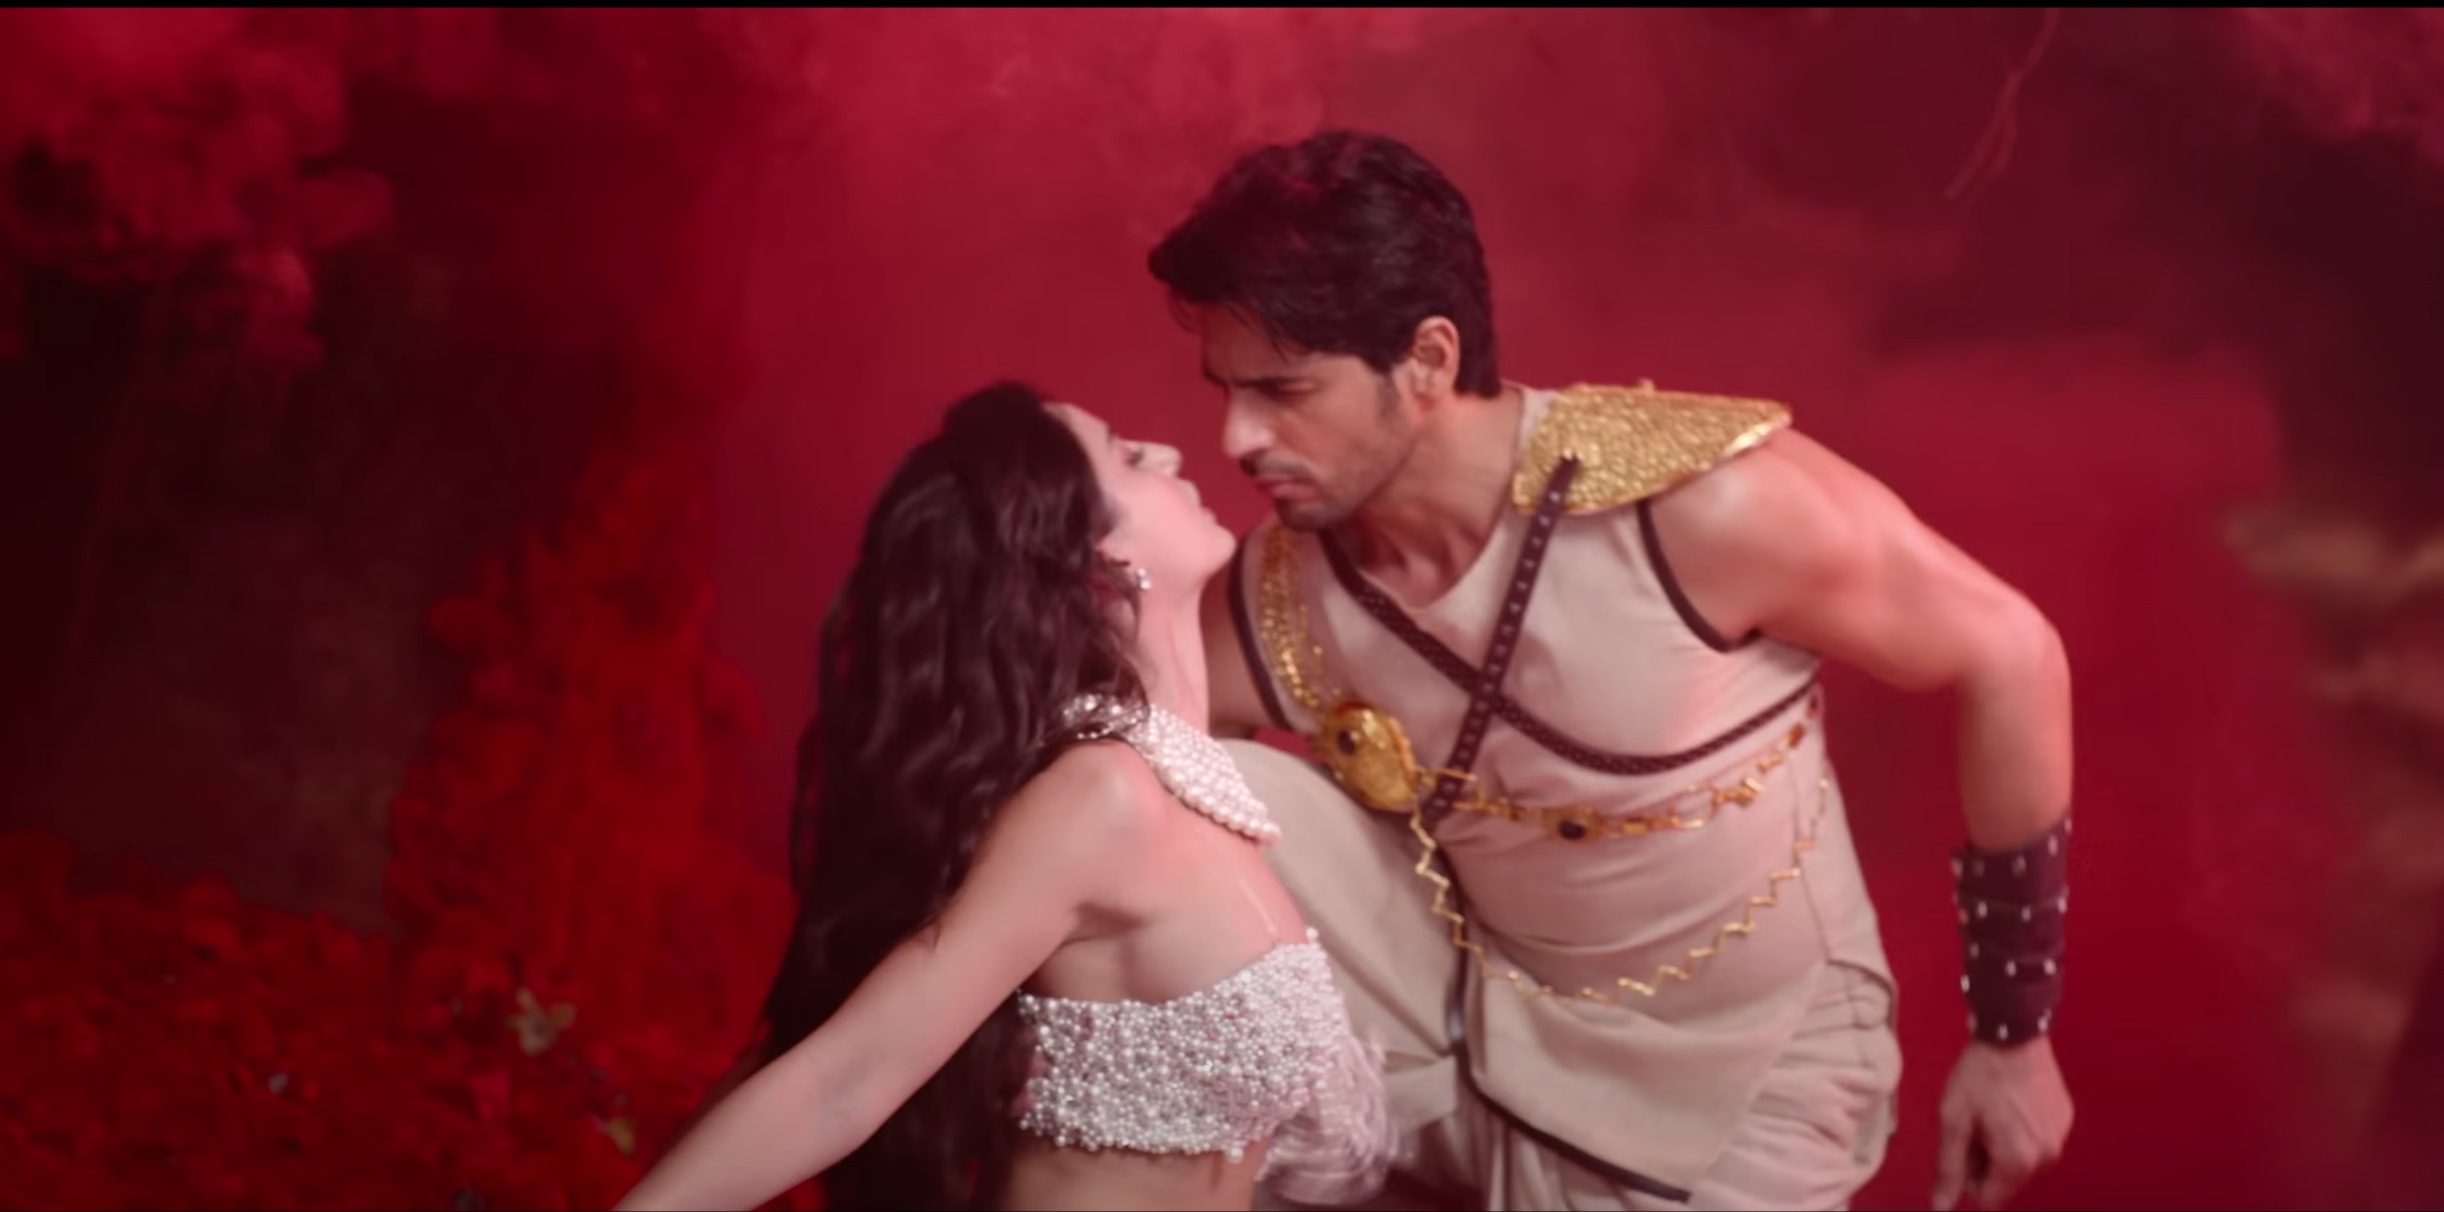 Nora Fatehi and Sidharth Malhotra in the movie.